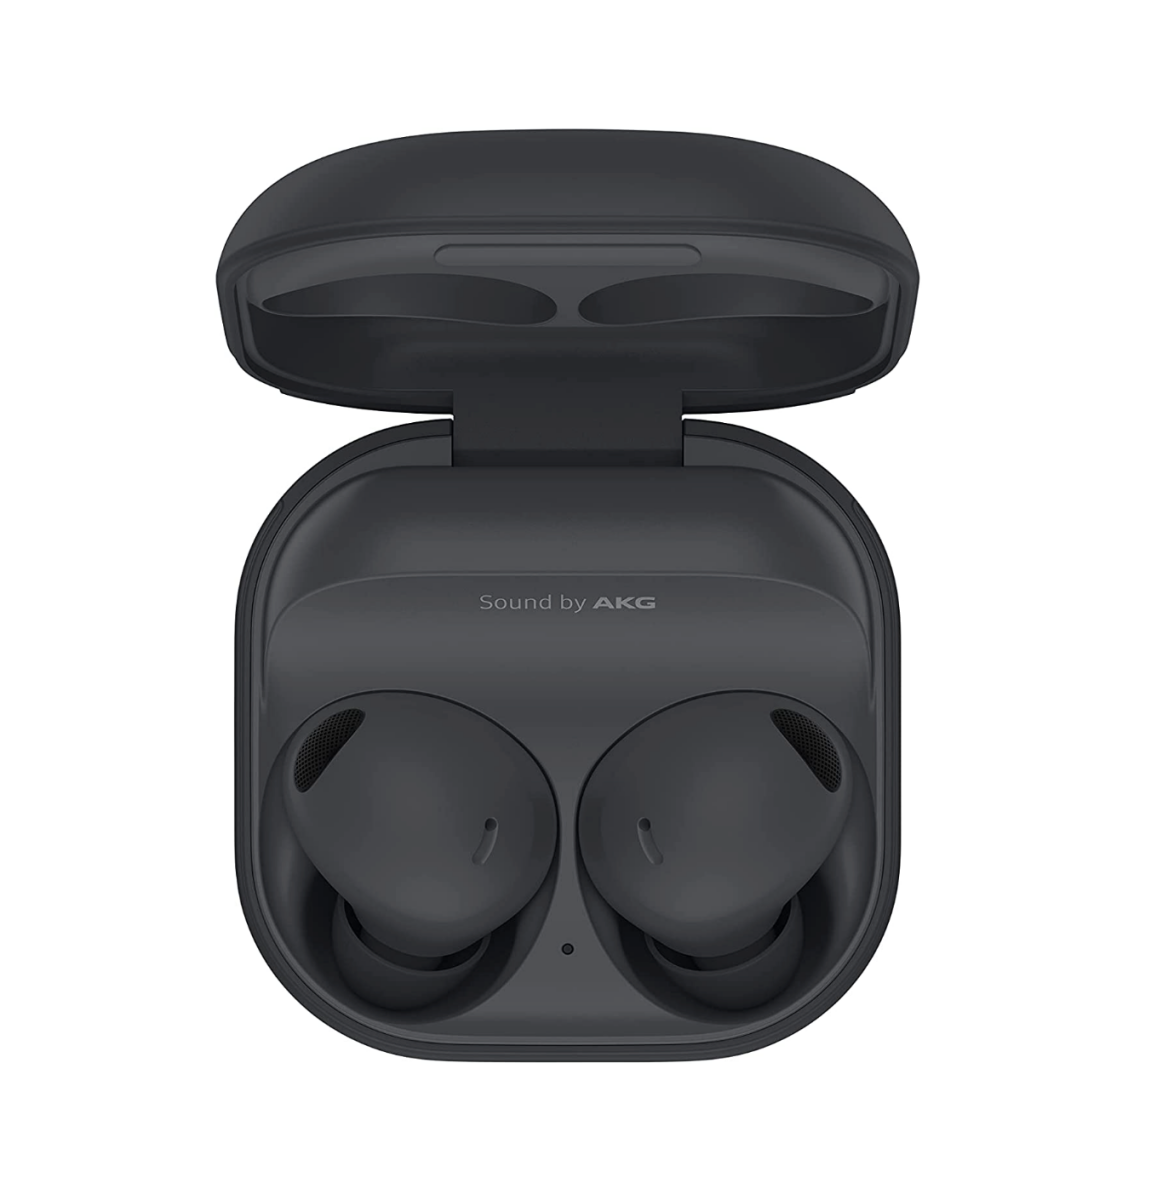 A pair of Samsung Galaxy Buds 2 Pro in their charging case